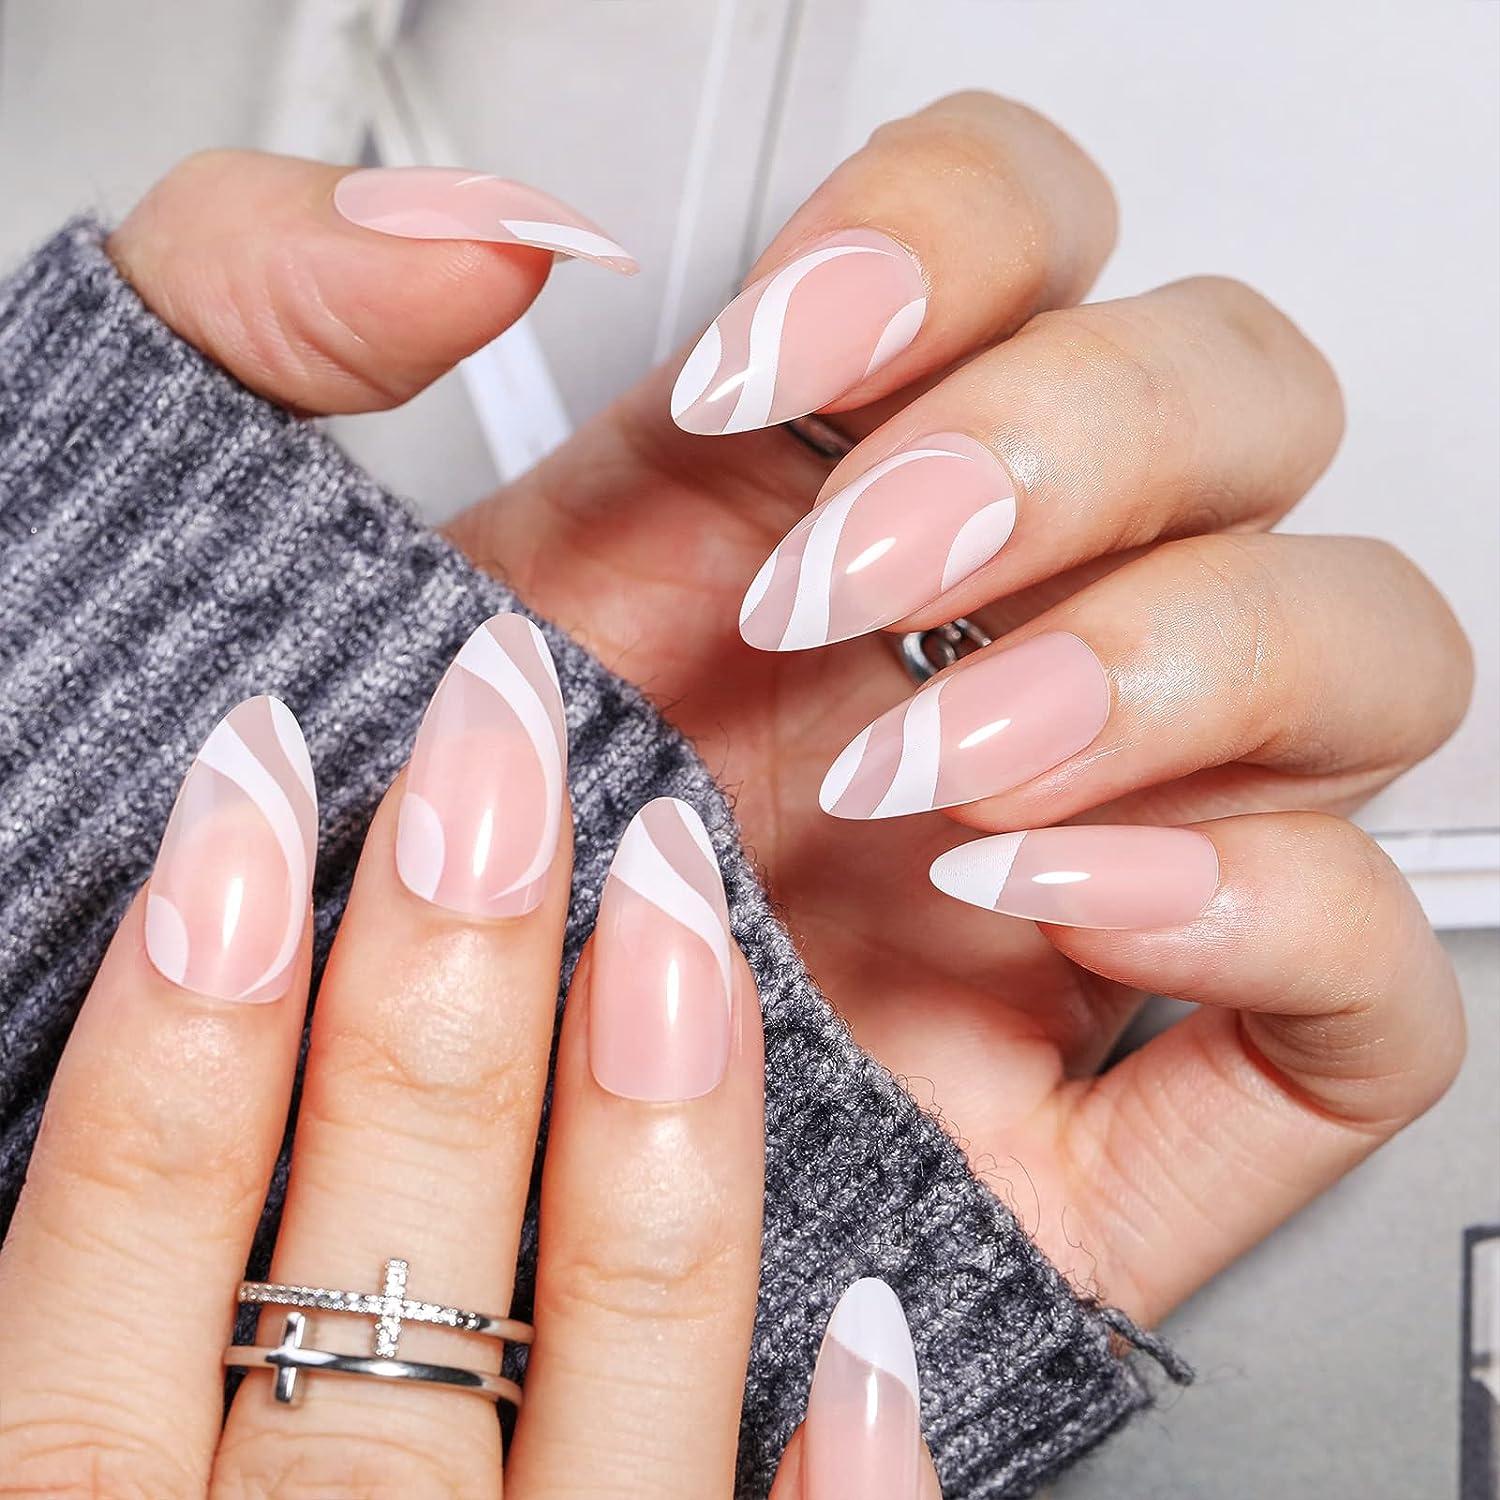 Ways To Keep Your Nails Healthy After Getting Nail Art And Extensions?